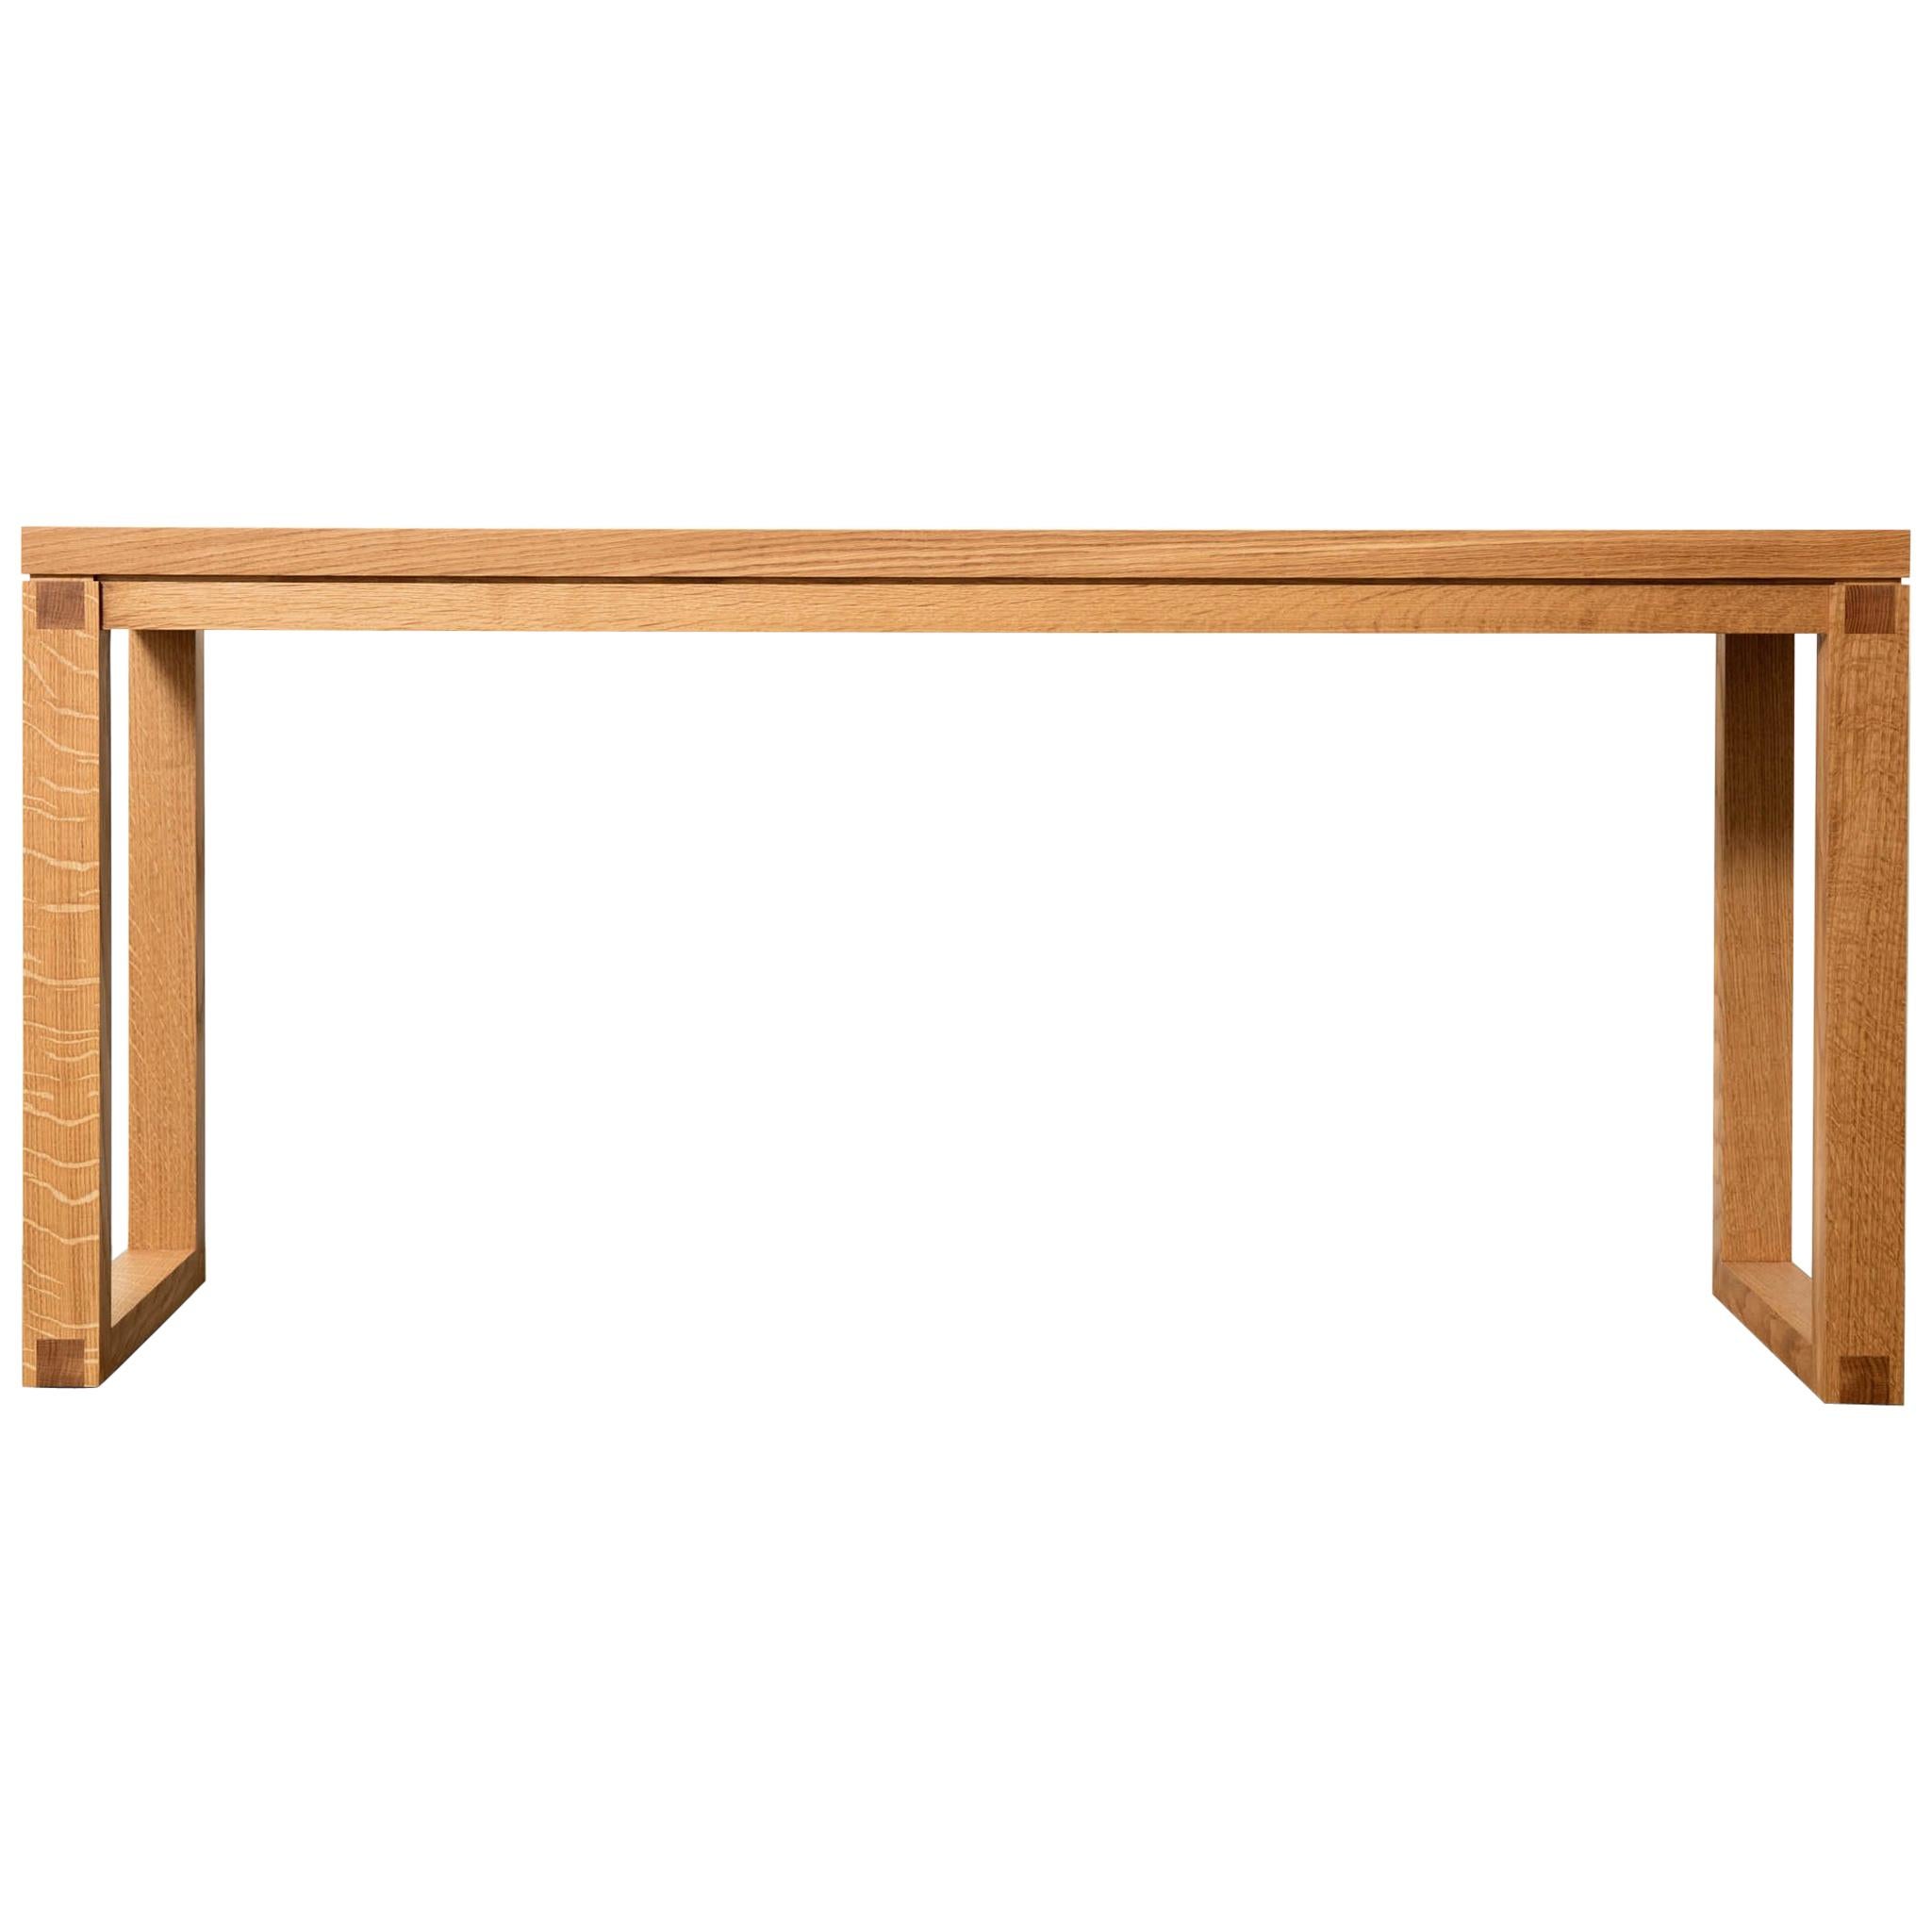 Narrow Modern White Oak Wood Console Table Parsons Style by Alabama Sawyer For Sale